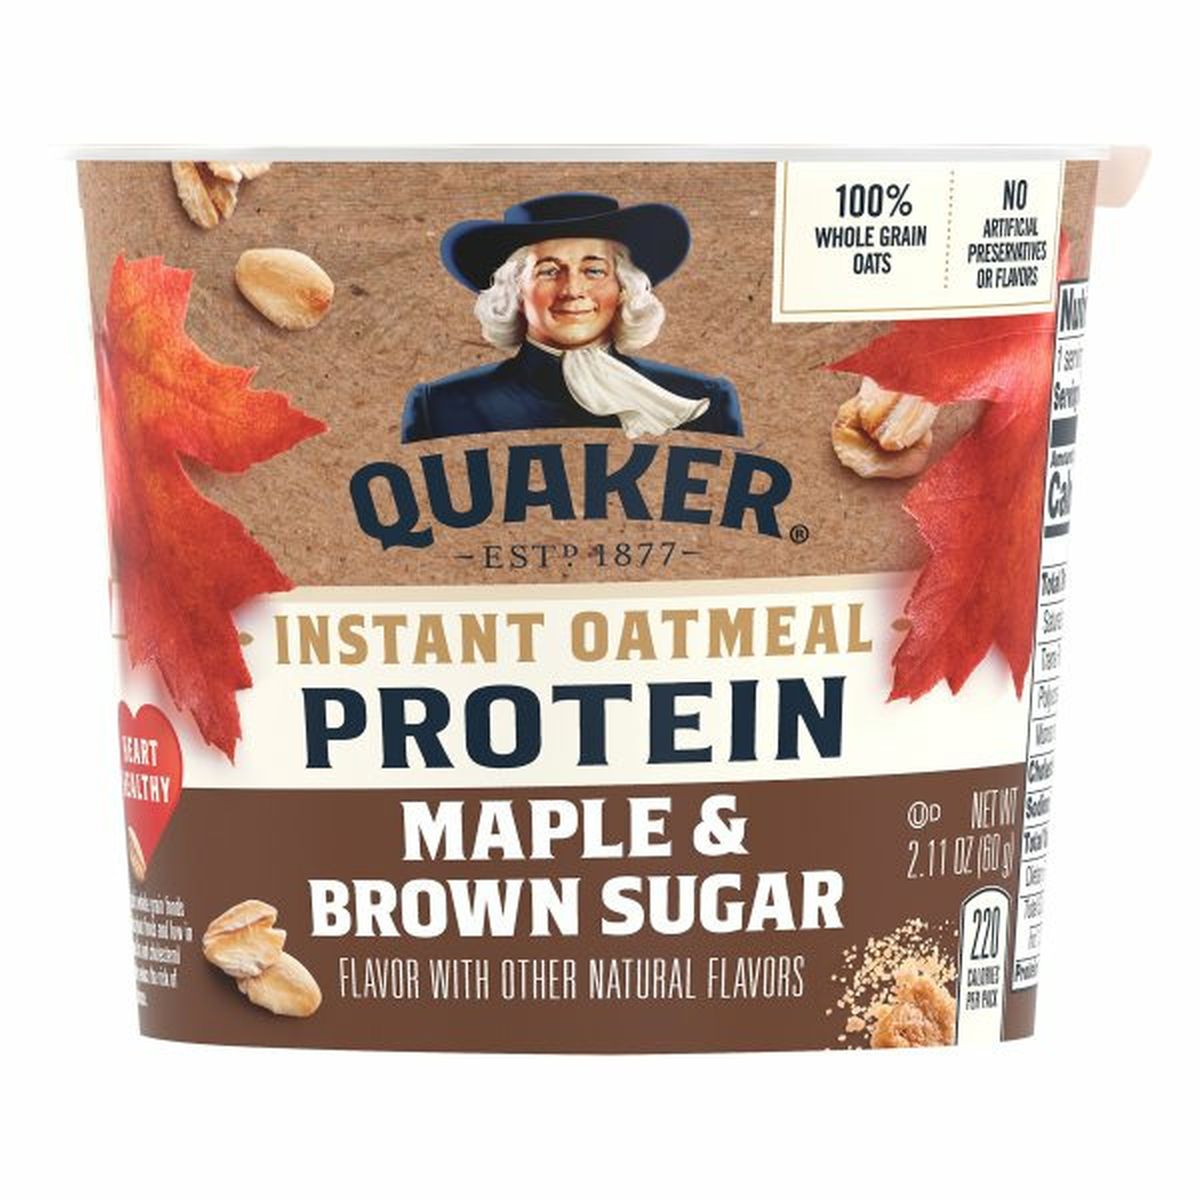 Calories in Quaker Instant Oatmeal, Protein, Maple & Brown Sugar